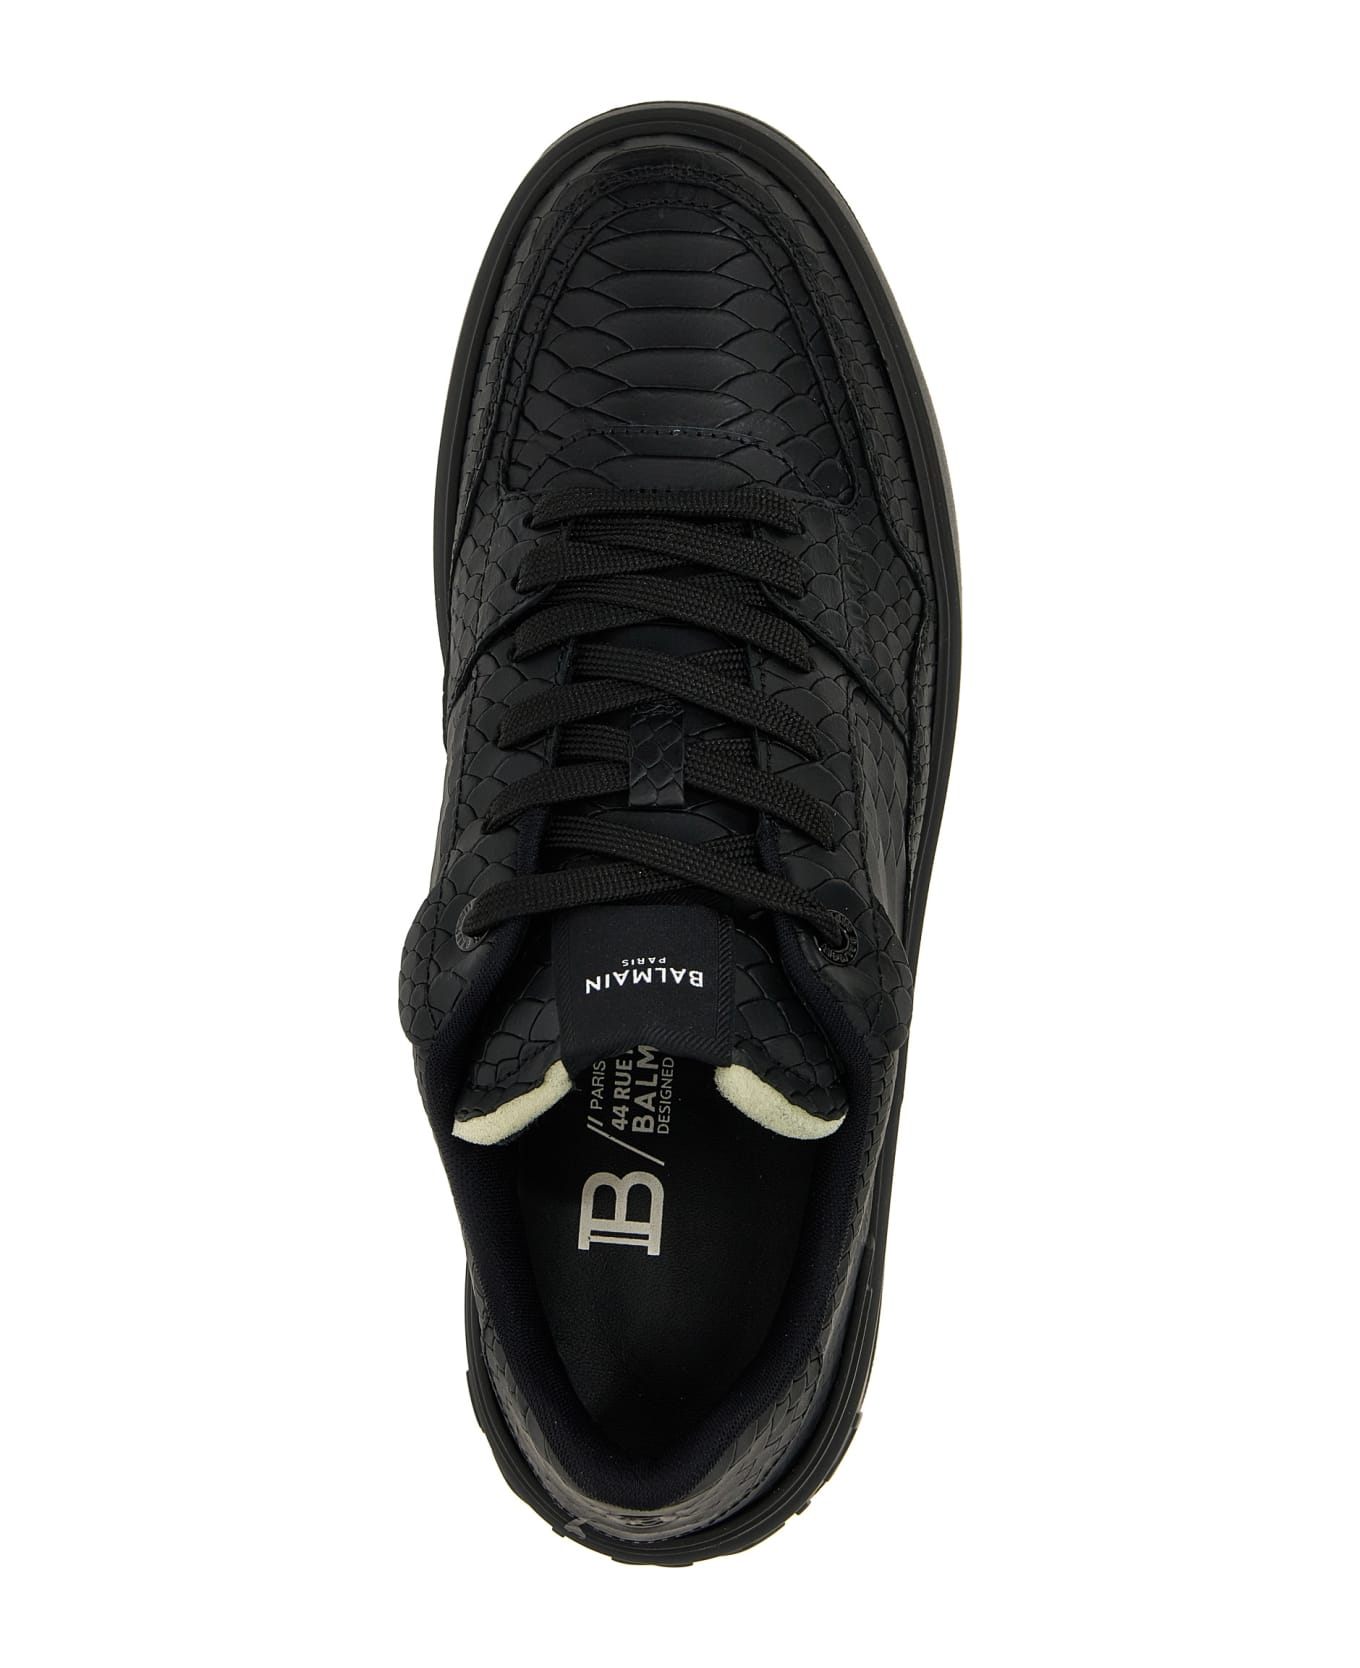 Balmain B-court Leather And Leather Sneakers - Black